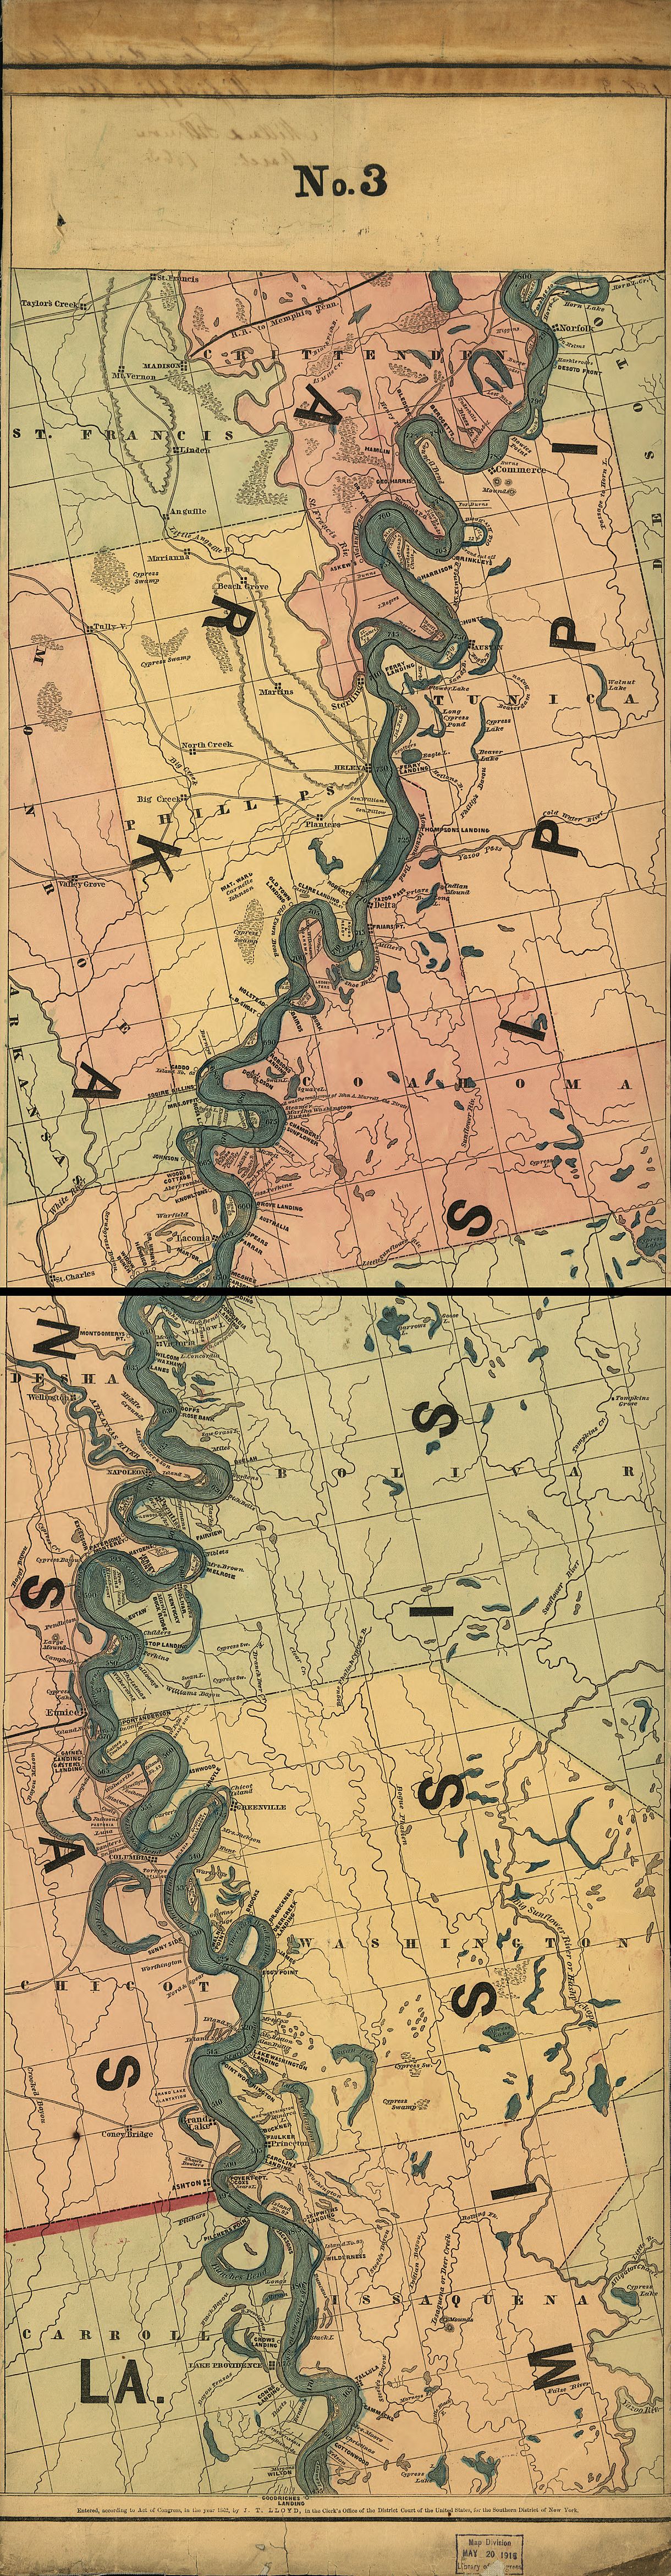 An 1862 map shows the location of Wilkerson (later called Huntington)